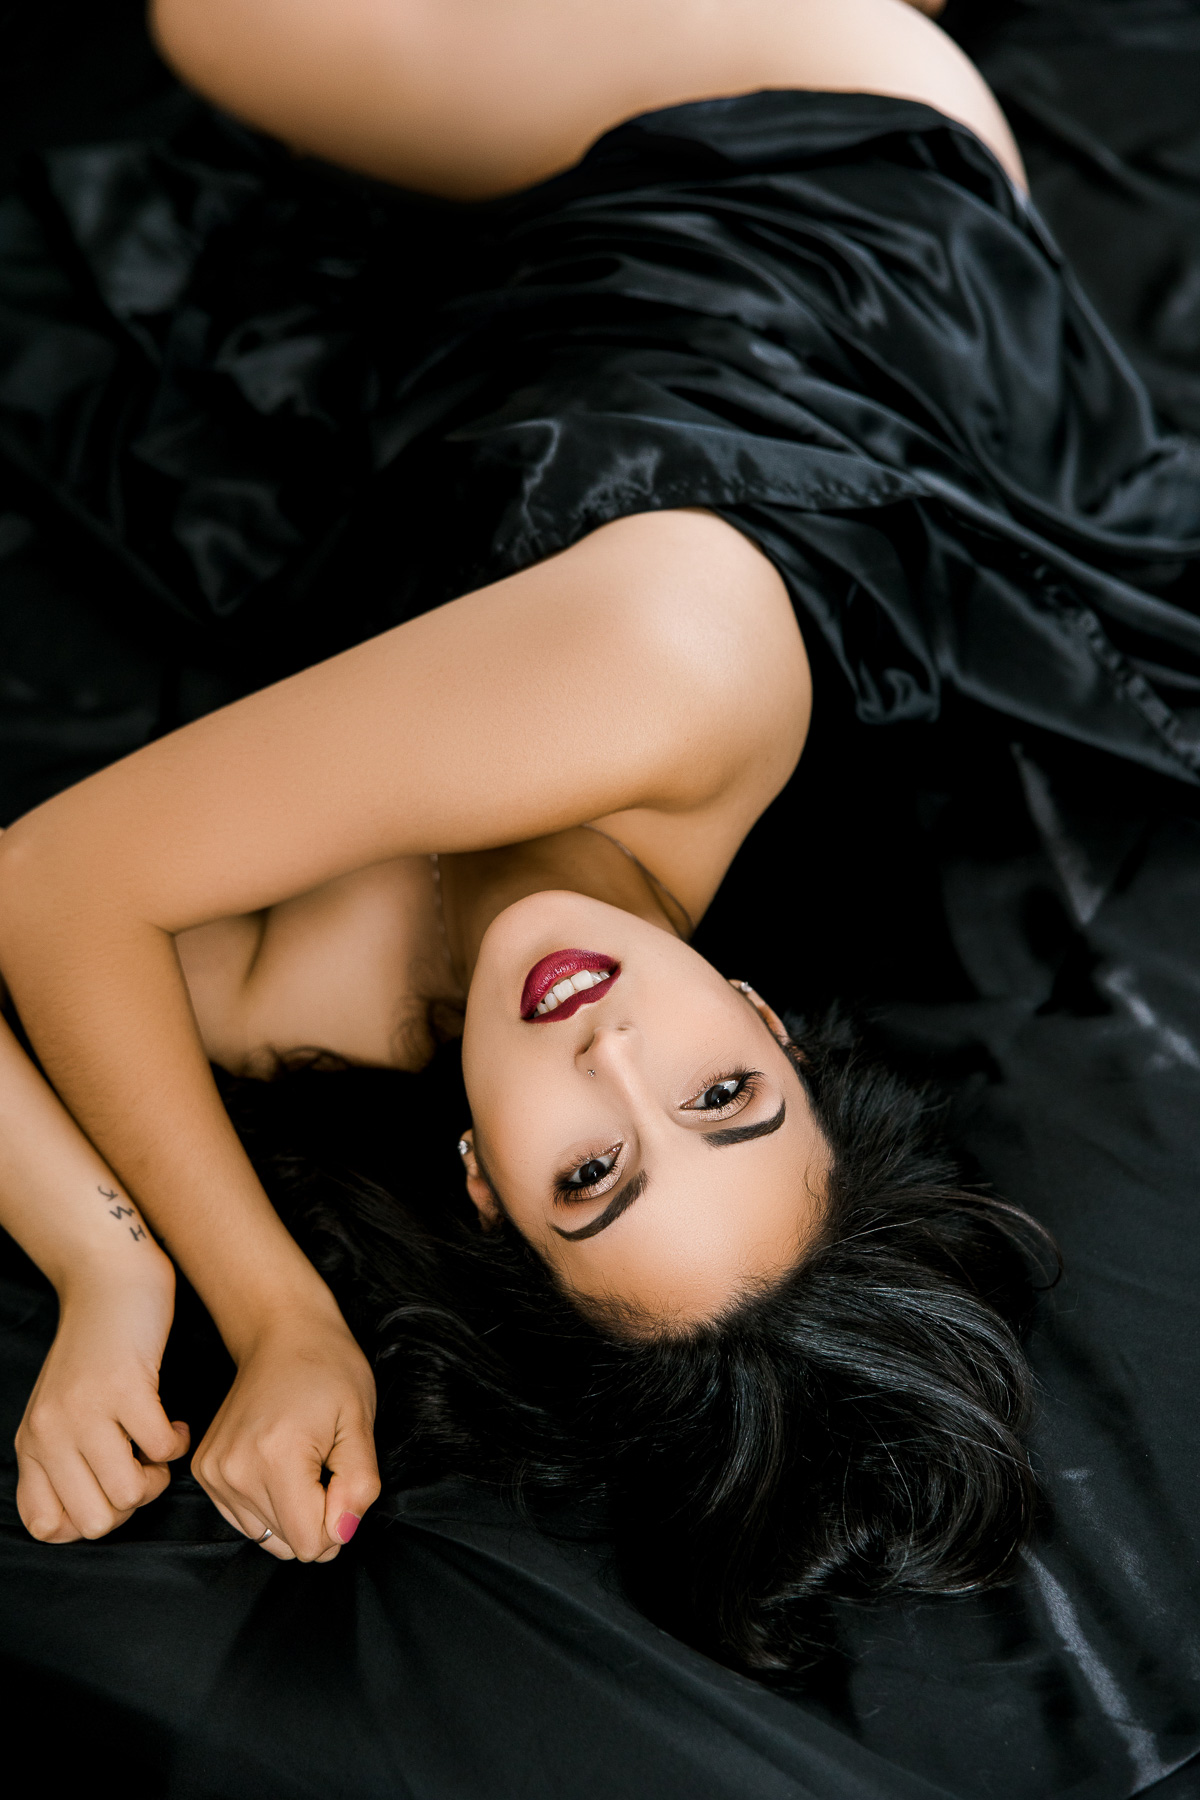 stunning woman with black hair and red lips tangled in satin bed sheets